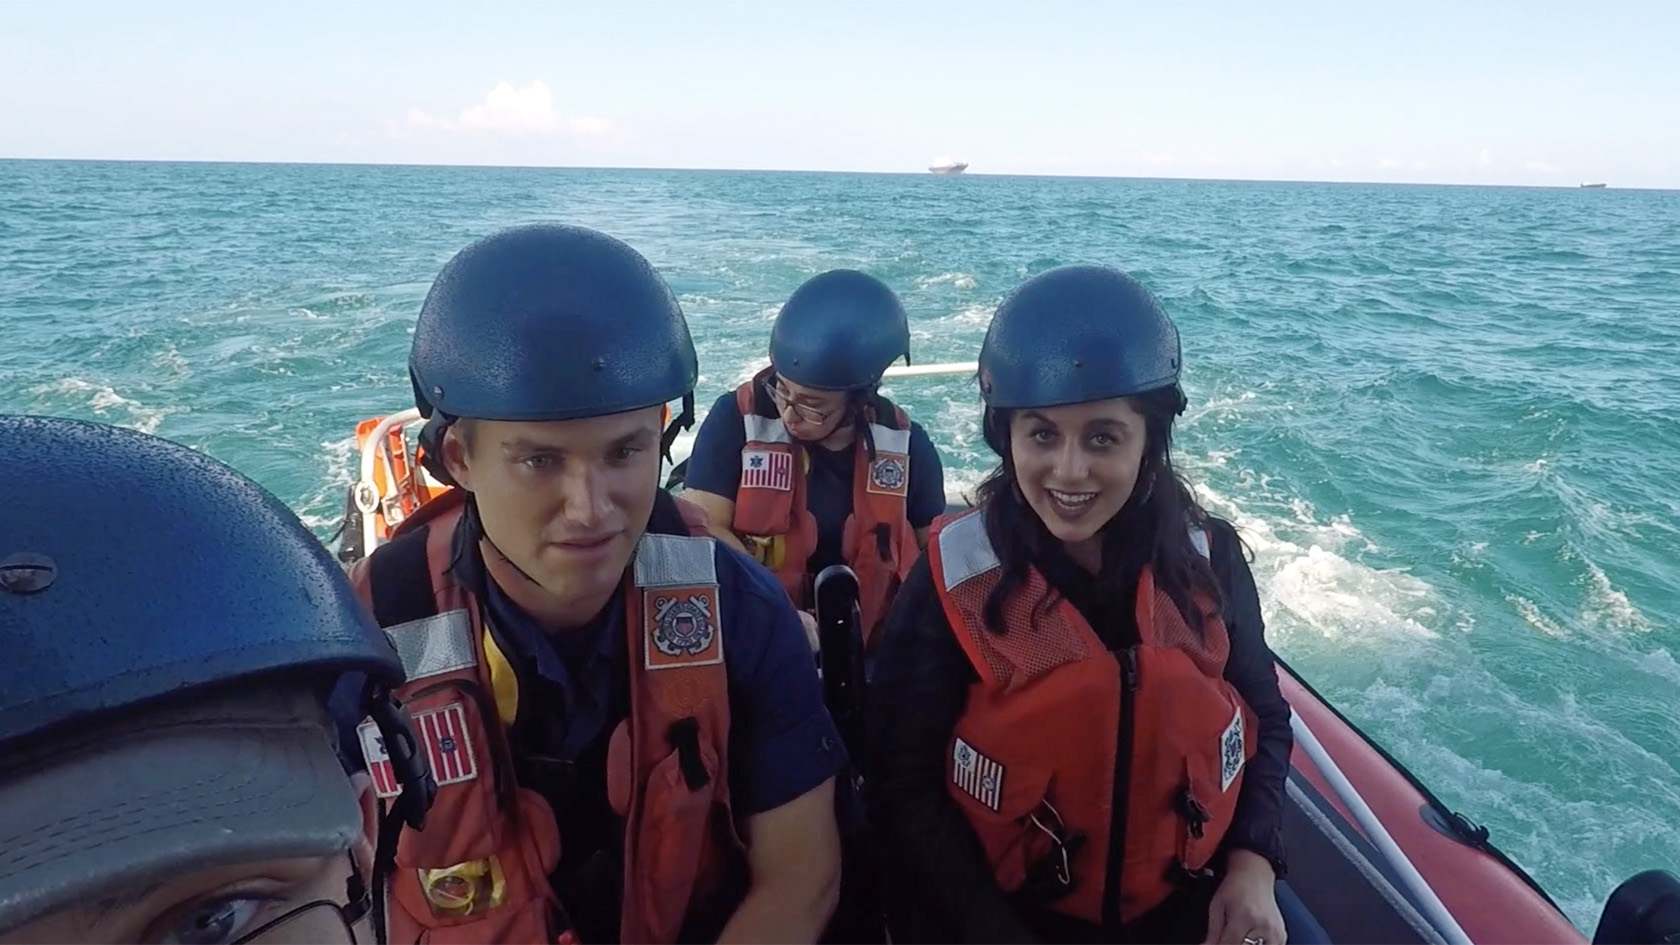 Reporter Samantha-Jo Roth and Photographer Vince Pecoraro joined crew members from the Coast Guard Cutter Paul Clark during a routine patrol in the Straits of Florida